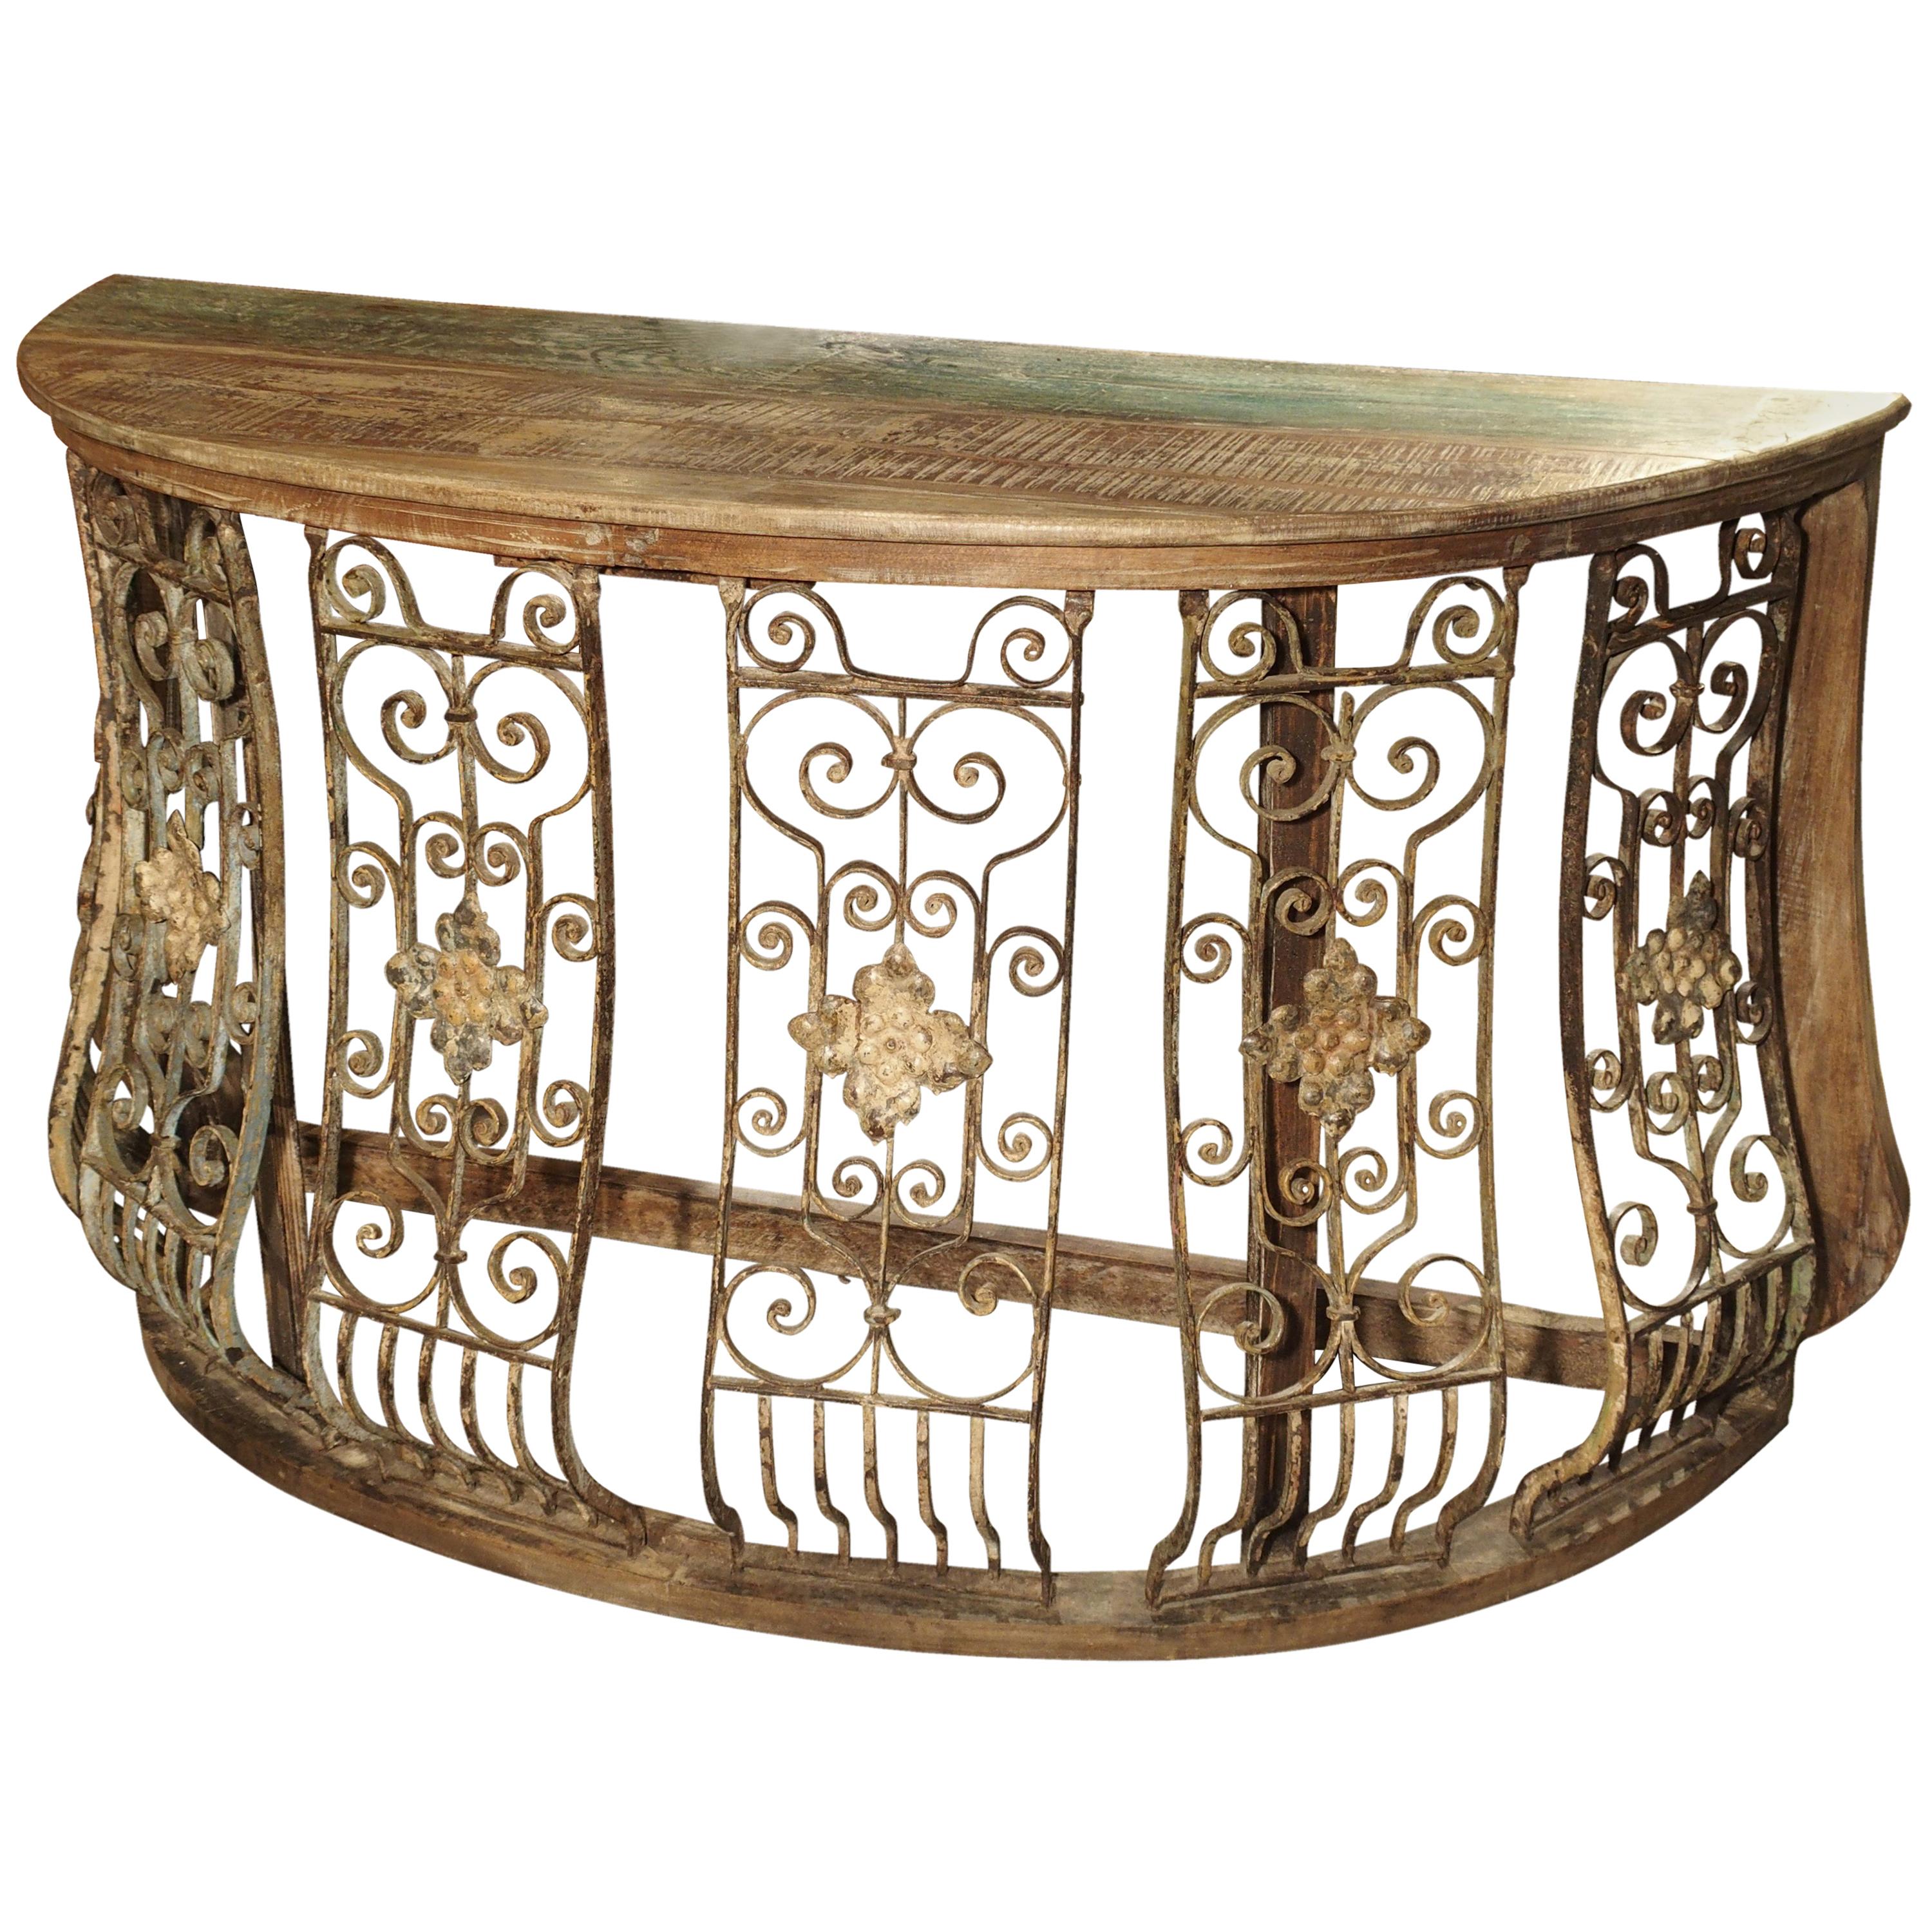 Wood and Iron Grille Demilune Console Table from India